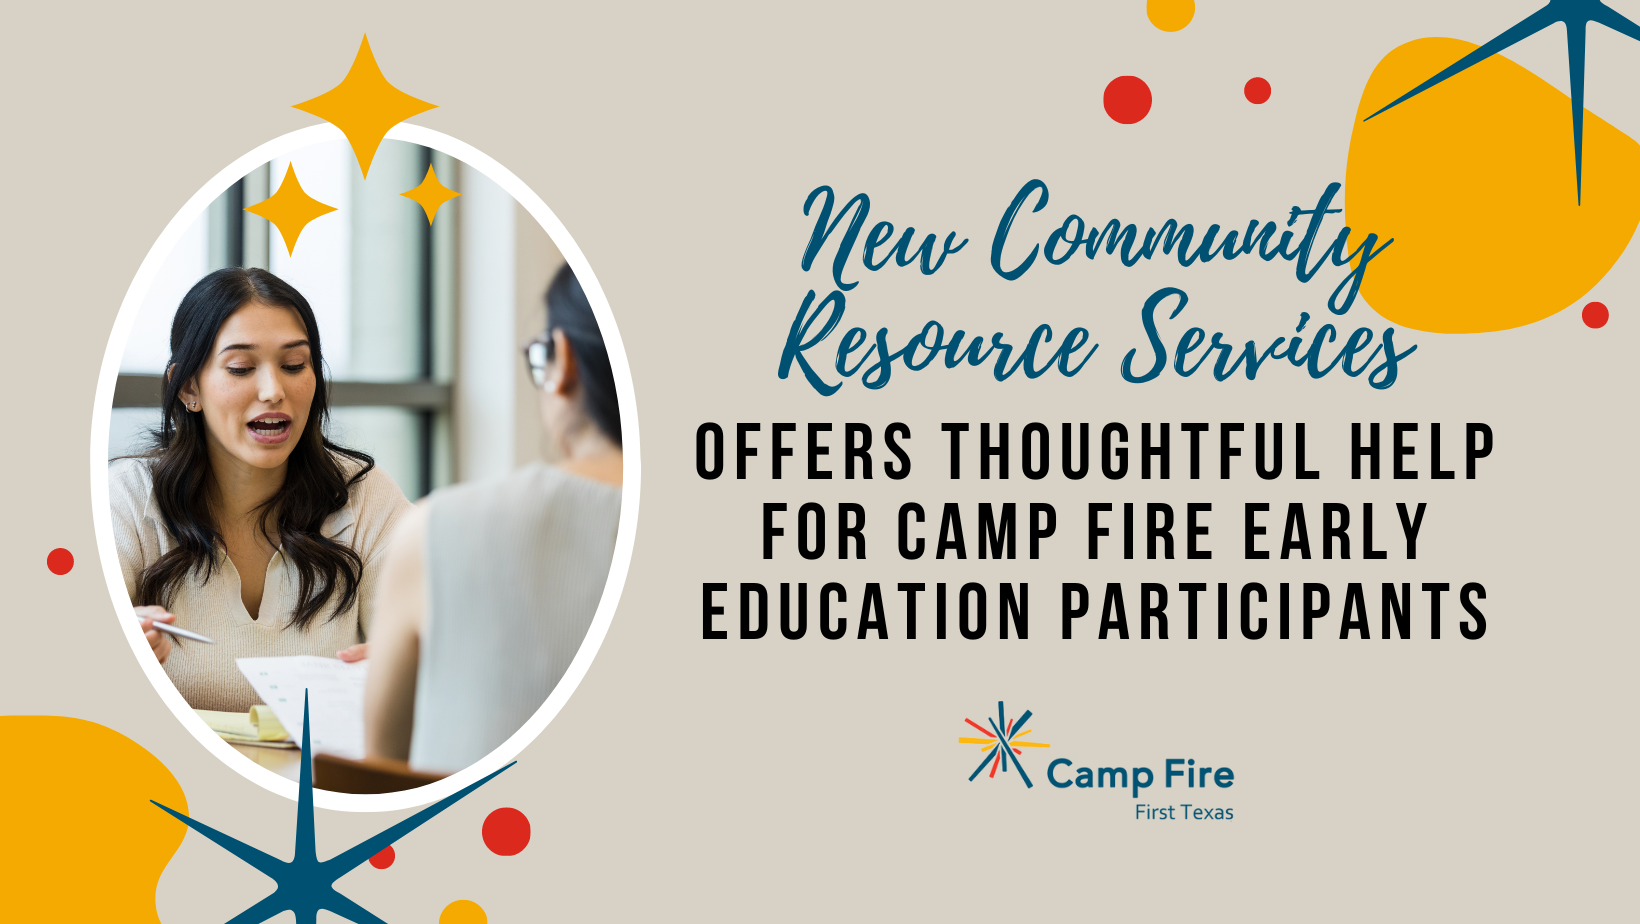 New Community Resource Services Offers Thoughtful Help for Camp Fire Early Education Participants, a Camp Fire First Texas blog